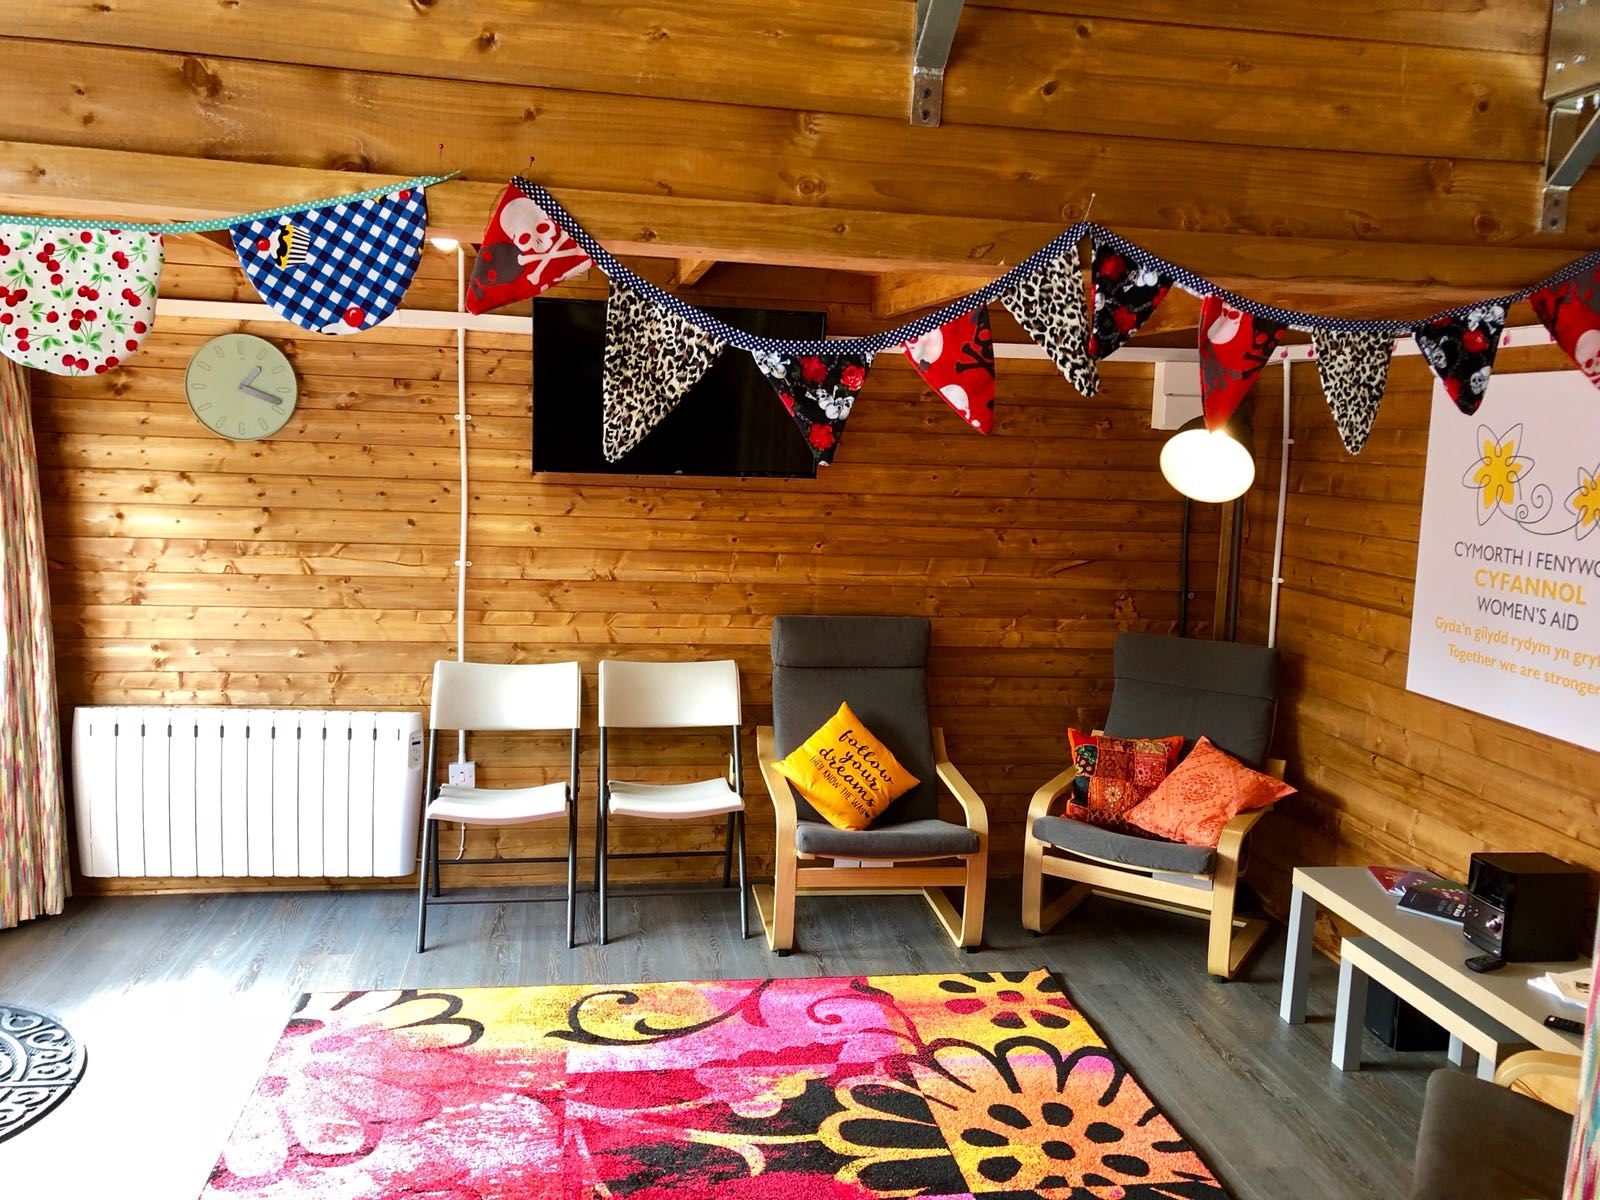 Shed with wooden walls. It's decorated with bunting, chairs and a colourful rug.